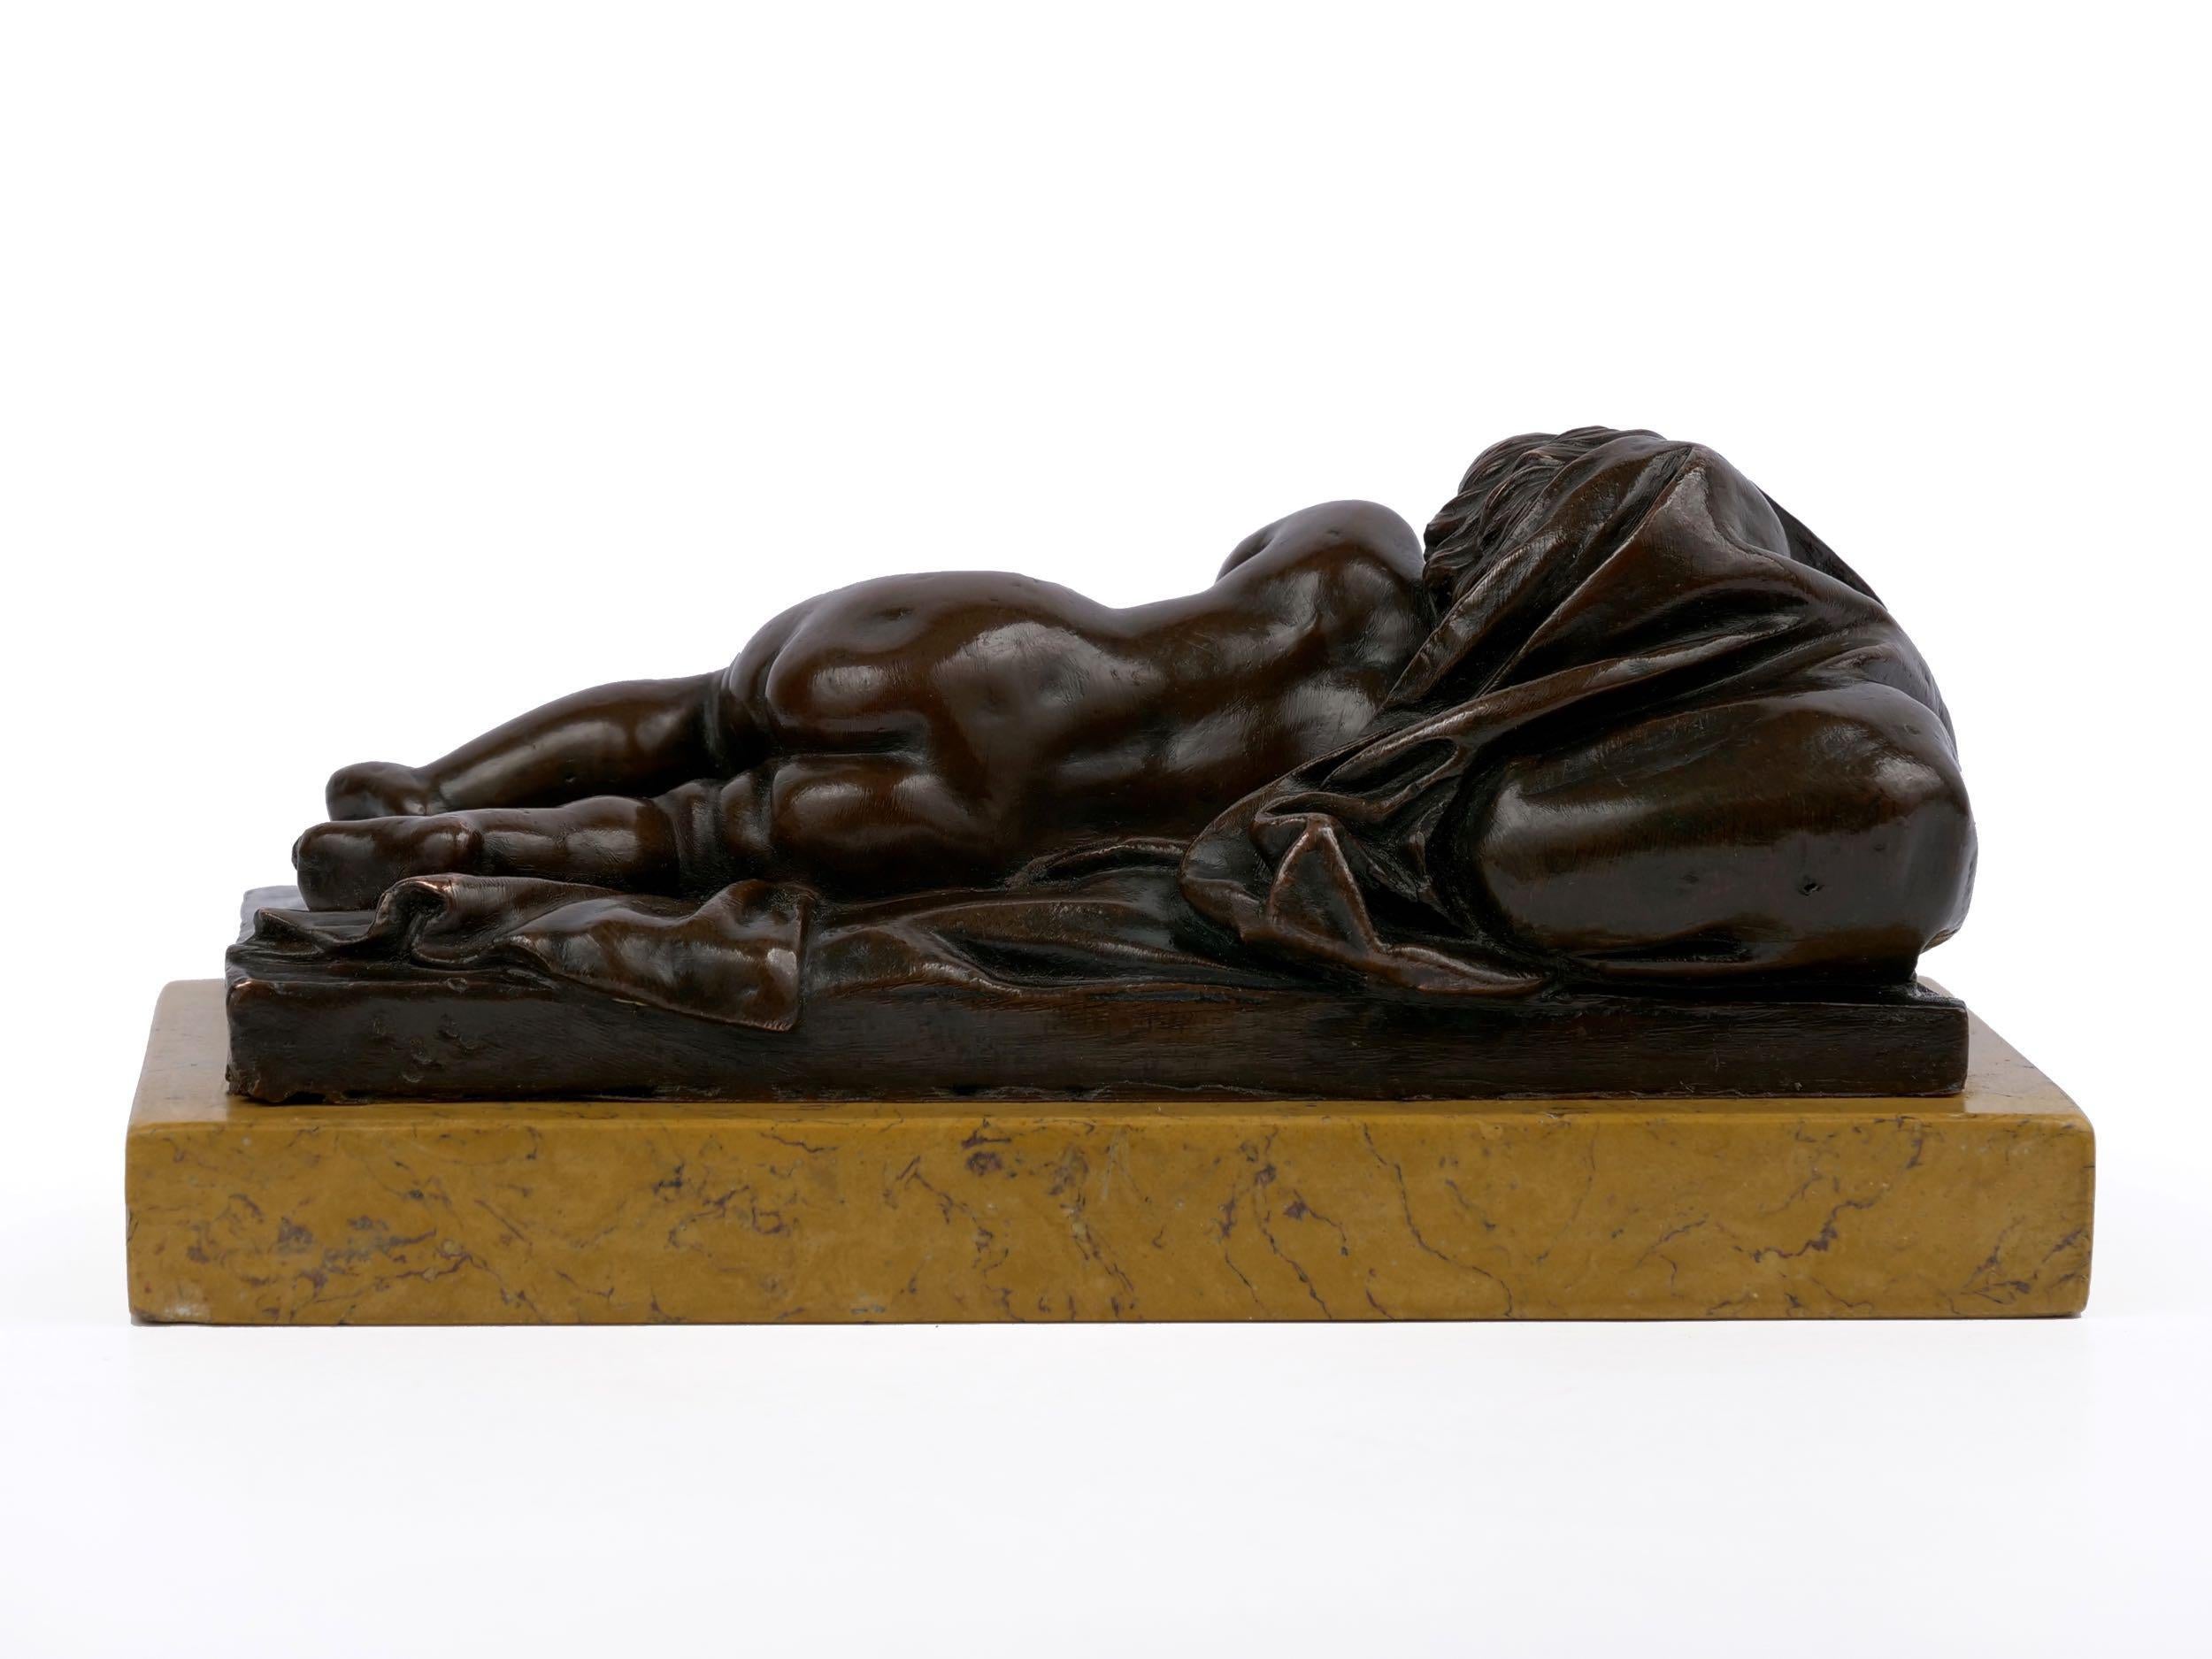 18th Century Antique Paperweight Sculpture of “Sleeping Putto” After François Duquesnoy For Sale